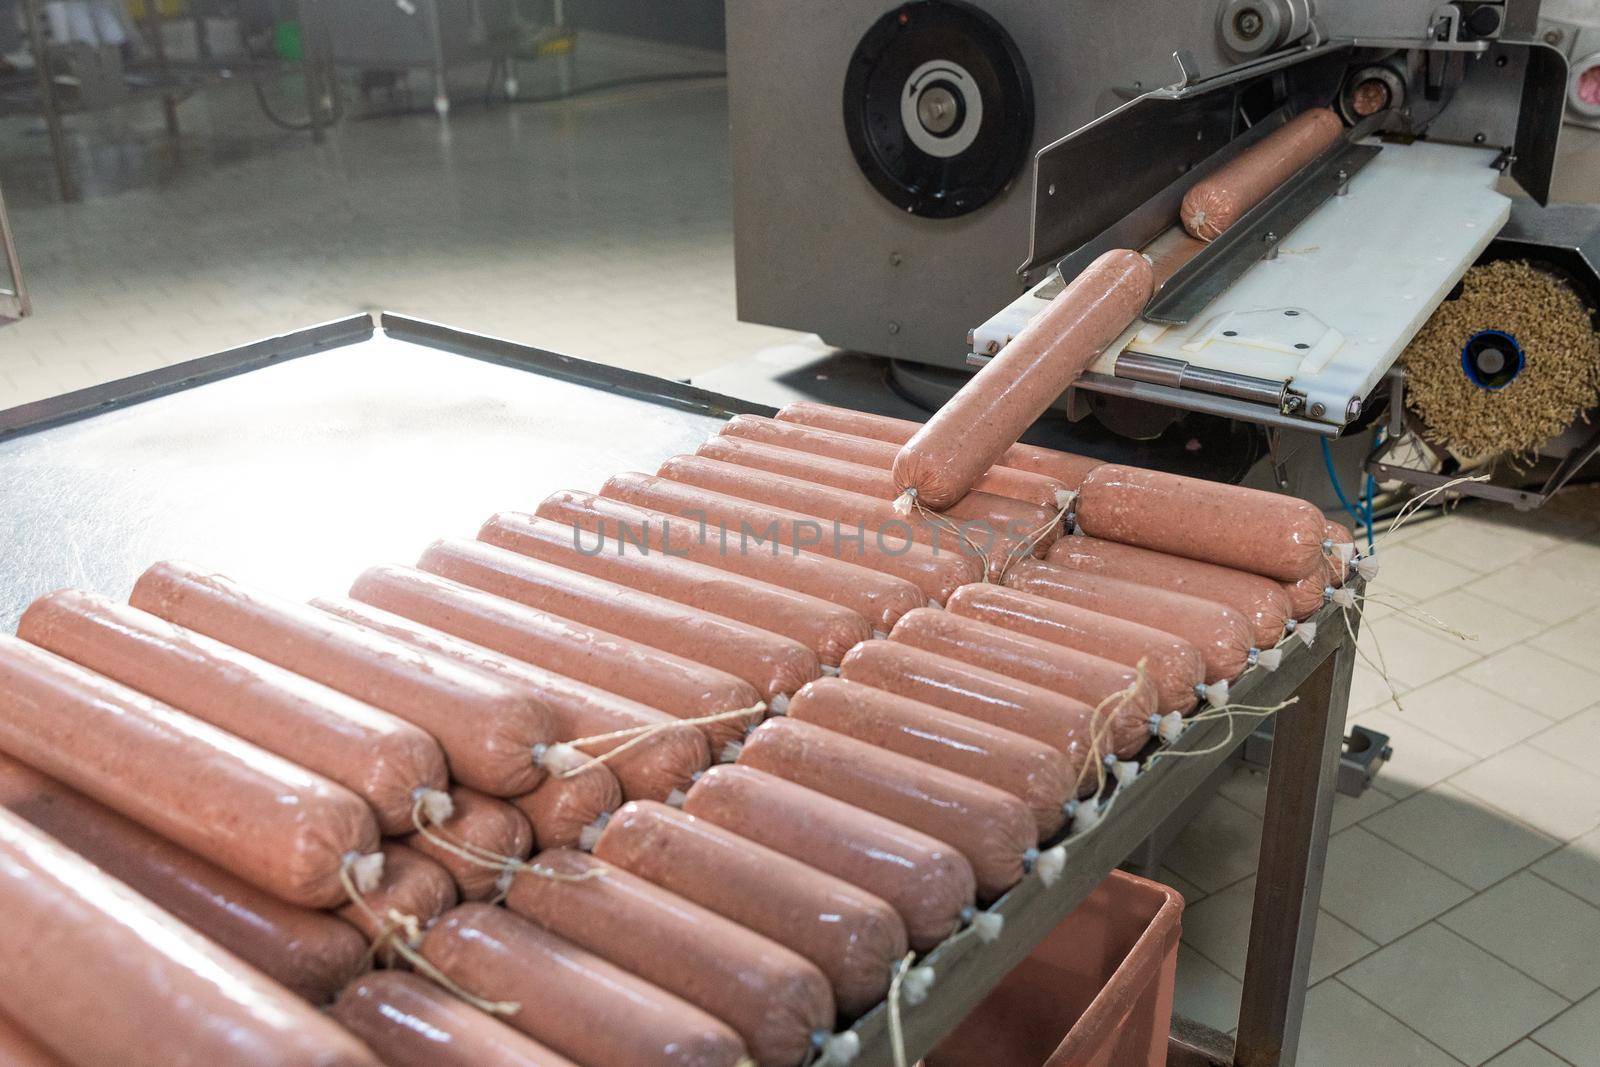 Making of Sausage, salami product, meat industry, machine